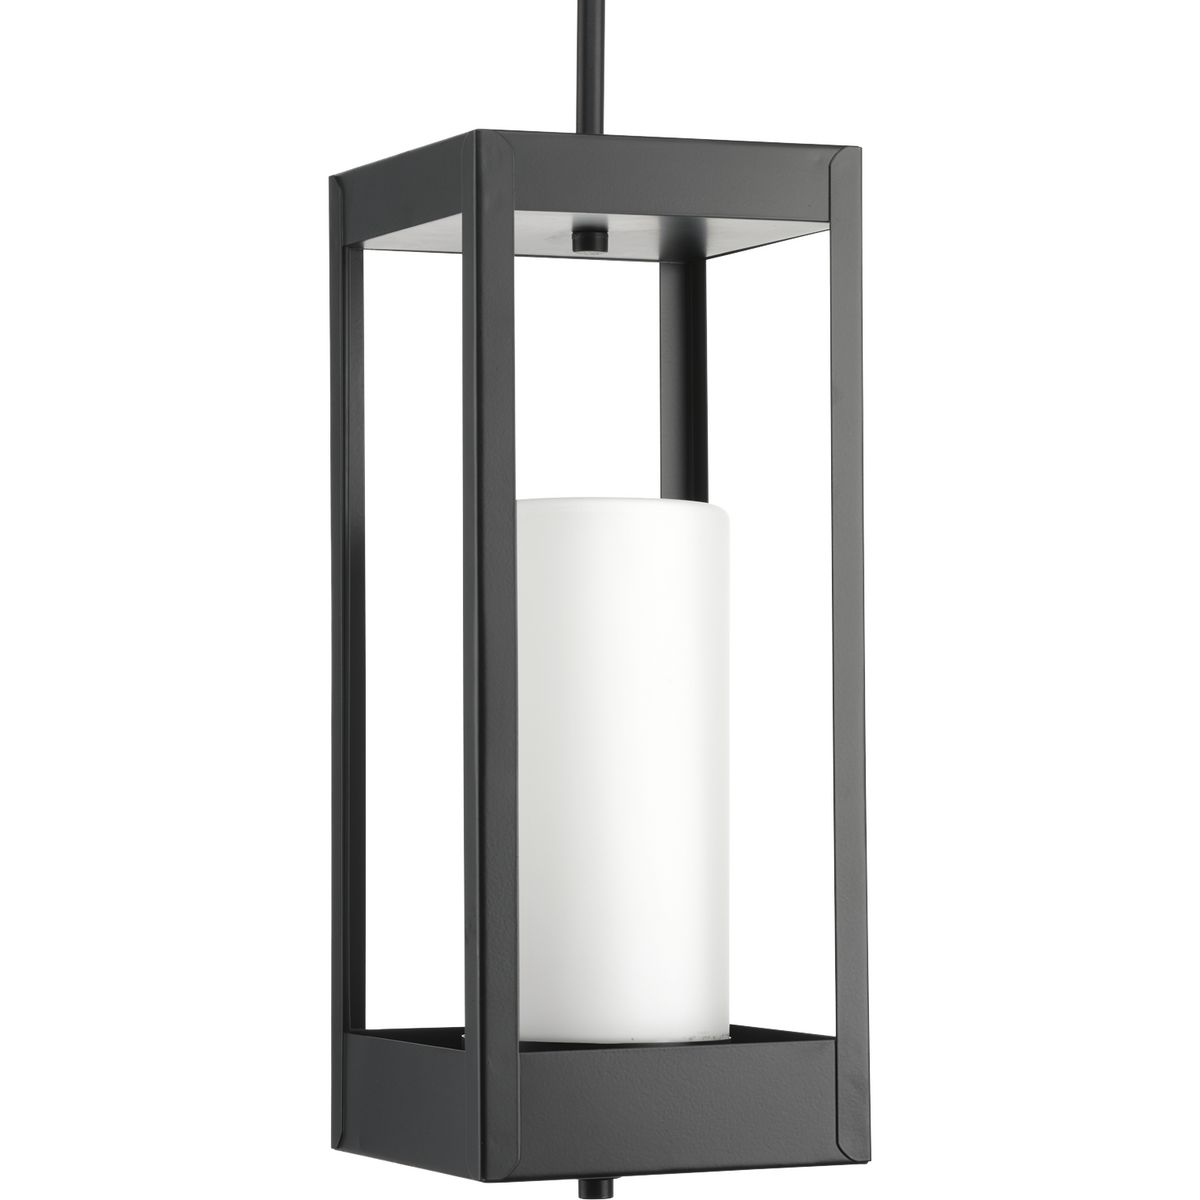 One-light large hanging lantern in the Patewood Collection have a modern shadowbox housing in a sleek Black finish constructed from durable stainless steel for years of reliability. The pillar candle style diffusers provide a crisp illumination for a pleasing complement to your home�s exterior.